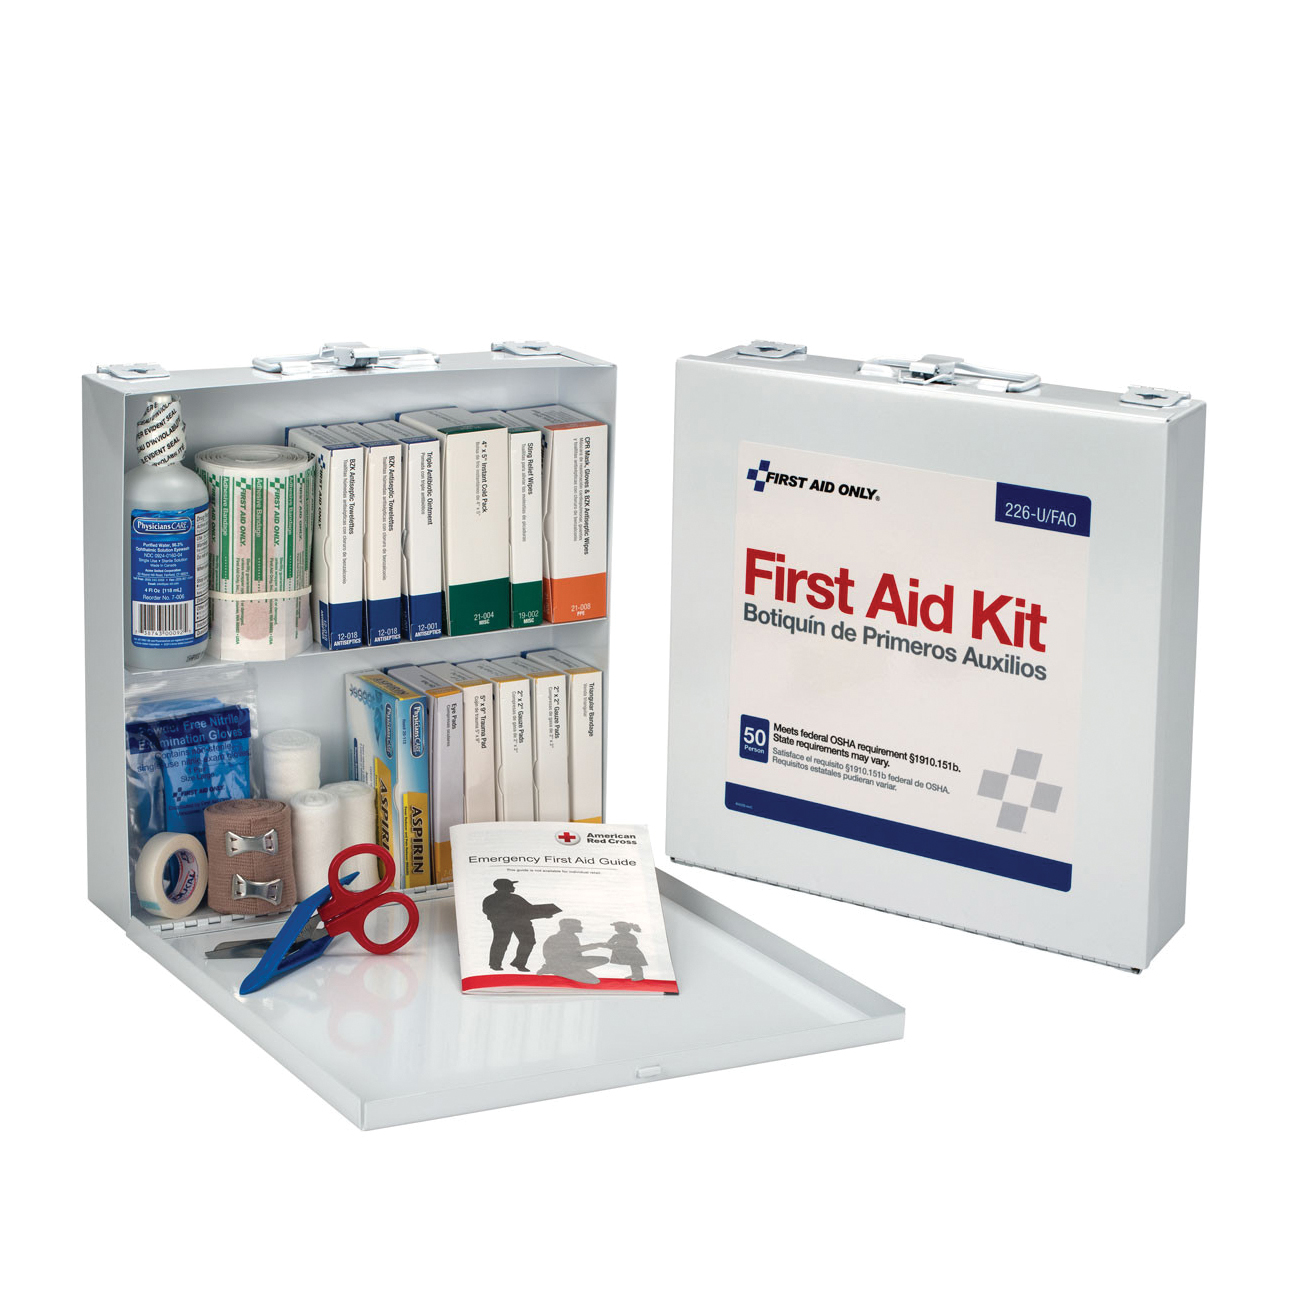 First Aid Only®226-U/FAO